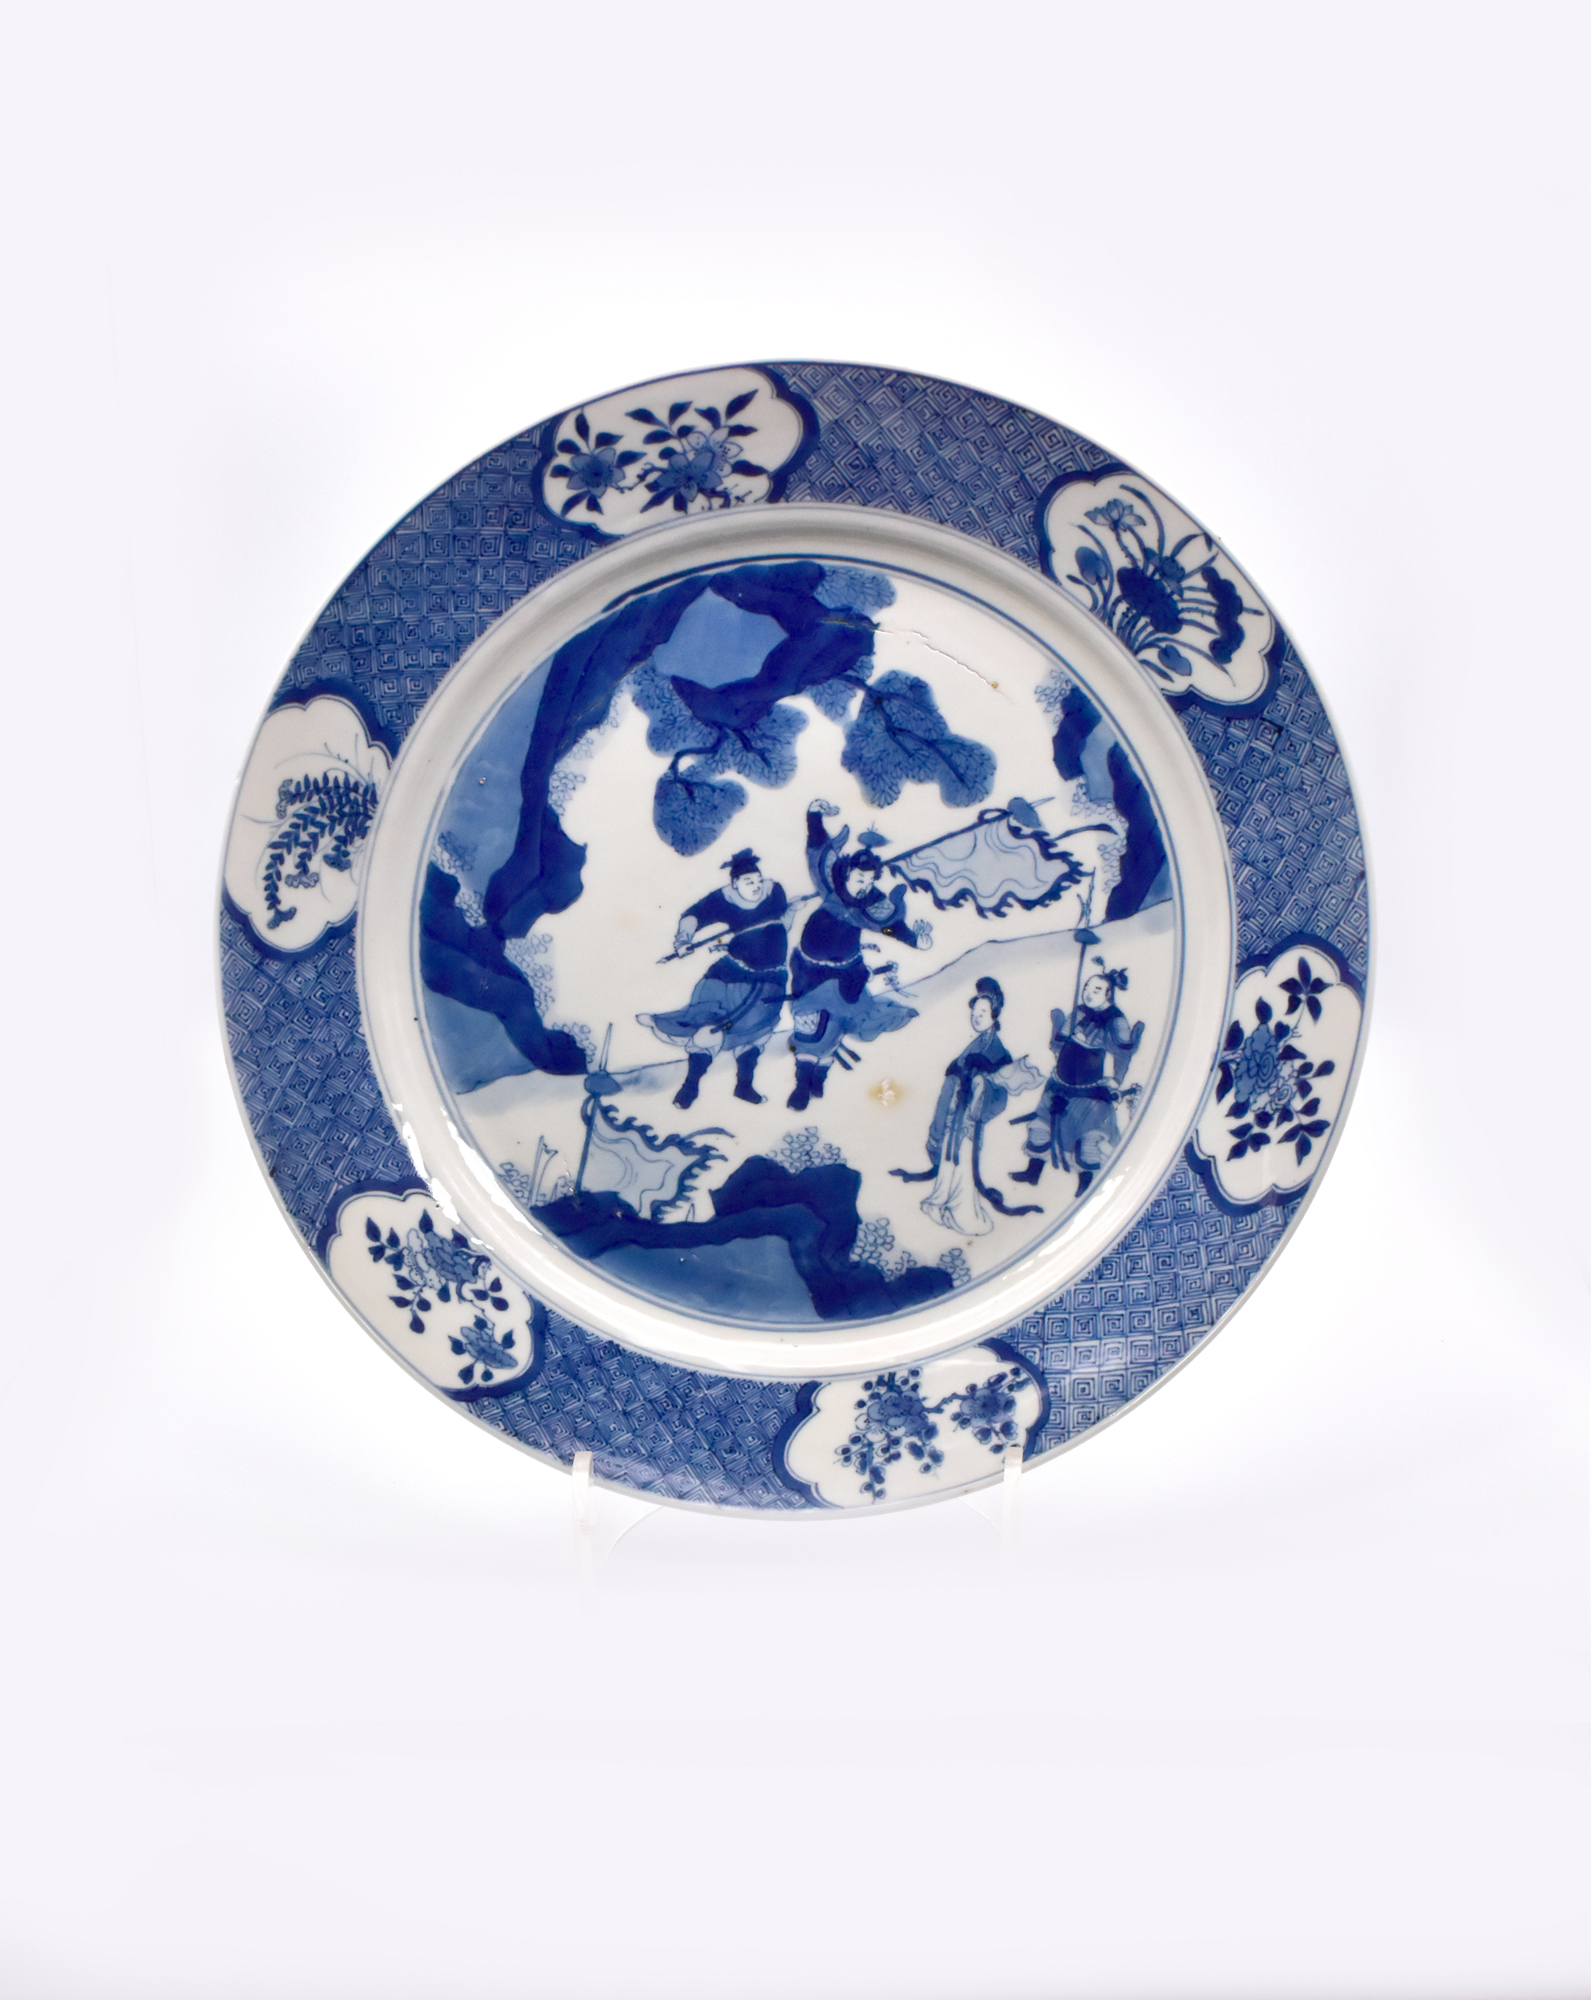 A LARGE CHINESE BLUE AND WHITE PORCELAIN DISH, QING DYNASTY, KANGXI PERIOD, 1662 – 1722